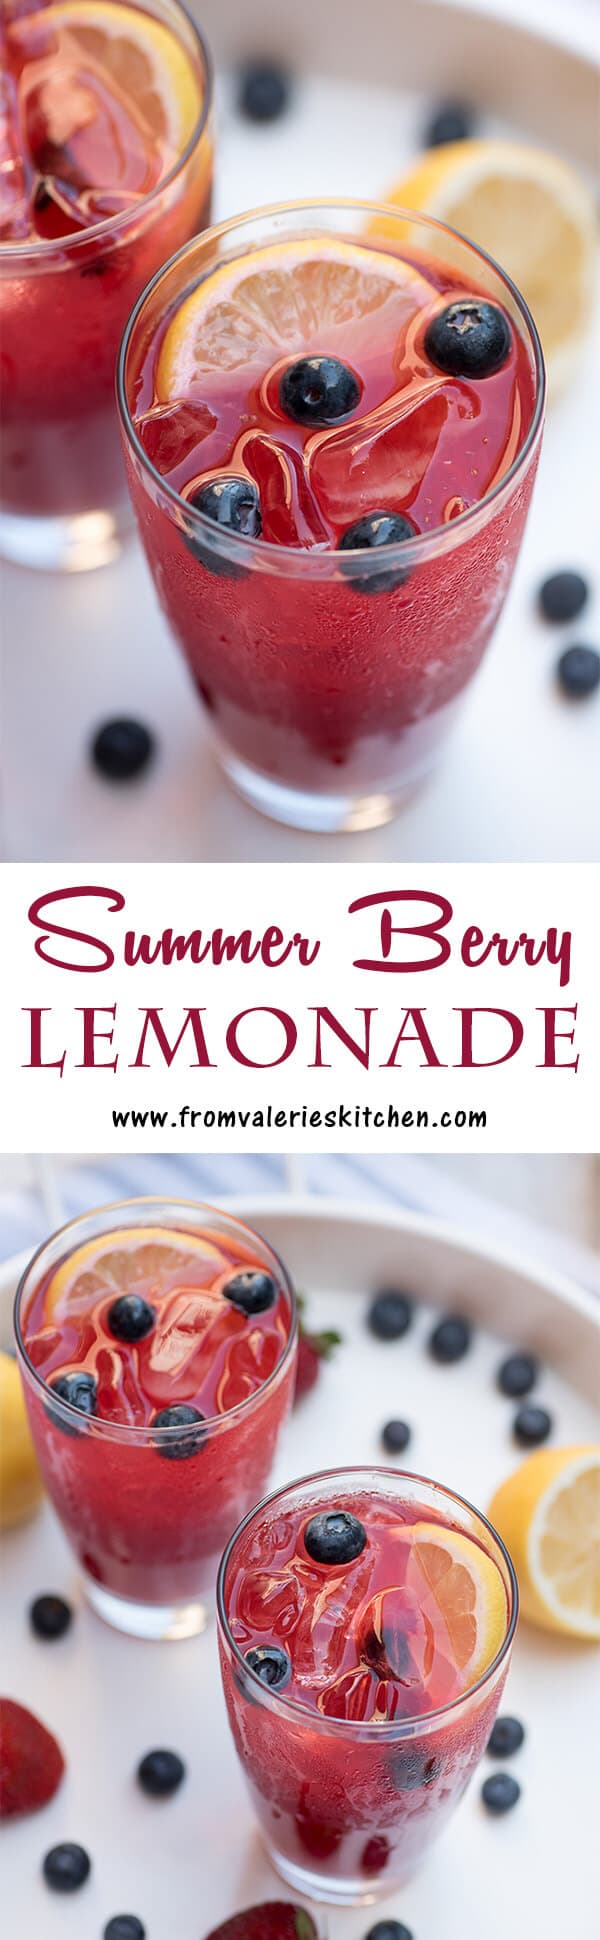 Two images of Summer Berry Lemonade in glasses with text overlay.